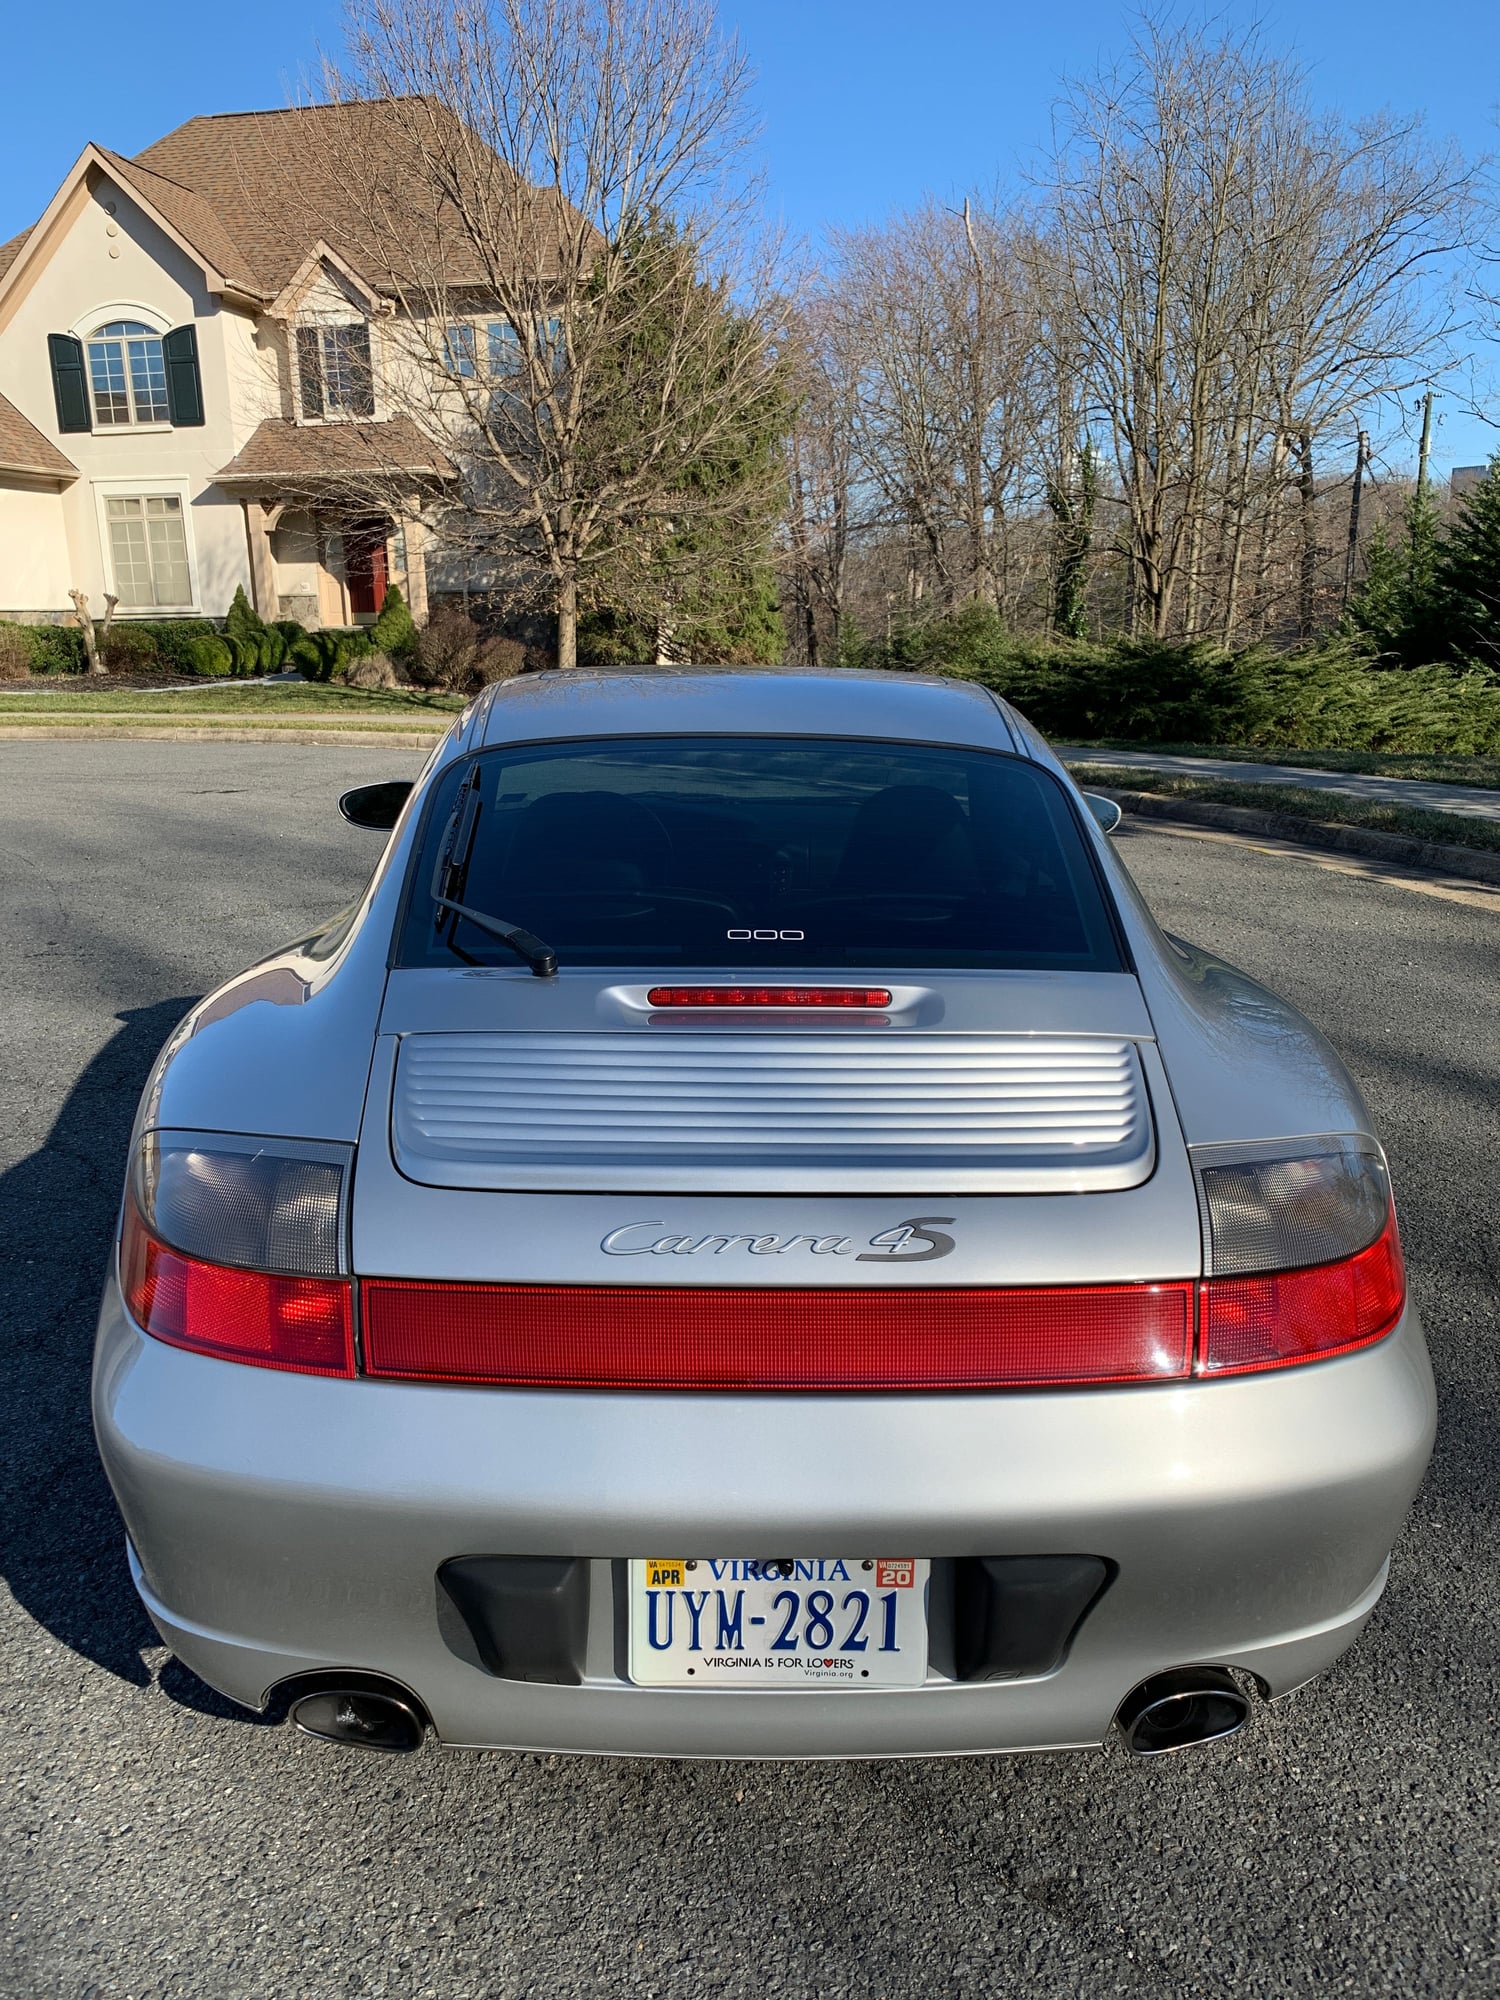 2002 Porsche 911 - 2002 996 C4S RWD conversion and LN 3.8 engine upgrade - Used - VIN WP0AA29932S622131 - 113,900 Miles - 6 cyl - 2WD - Manual - Coupe - Silver - Vienna, VA 22182, United States